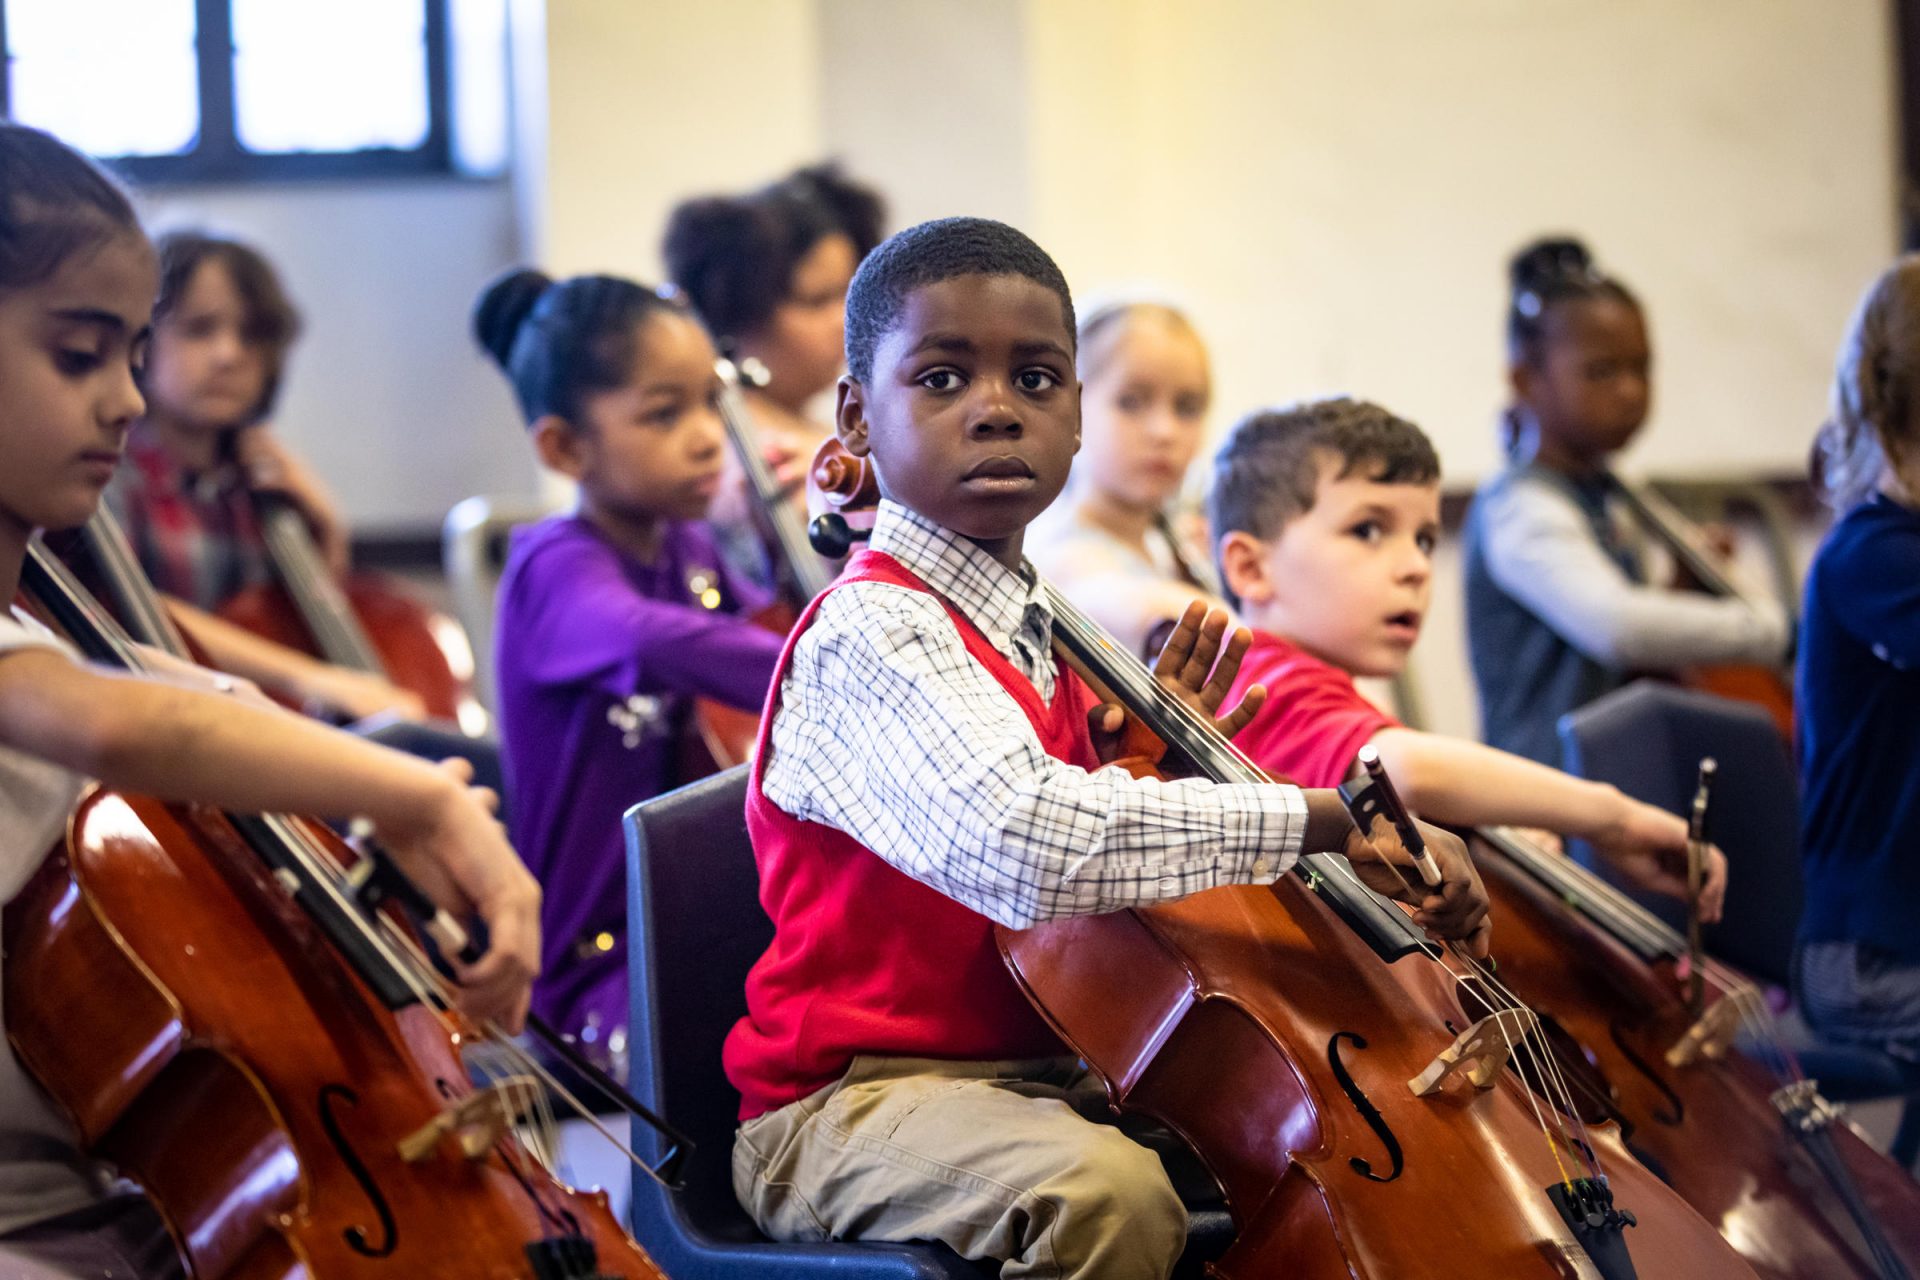 Students practice cello during a lesson at Hope Academy of Music and the Arts in East Liberty.